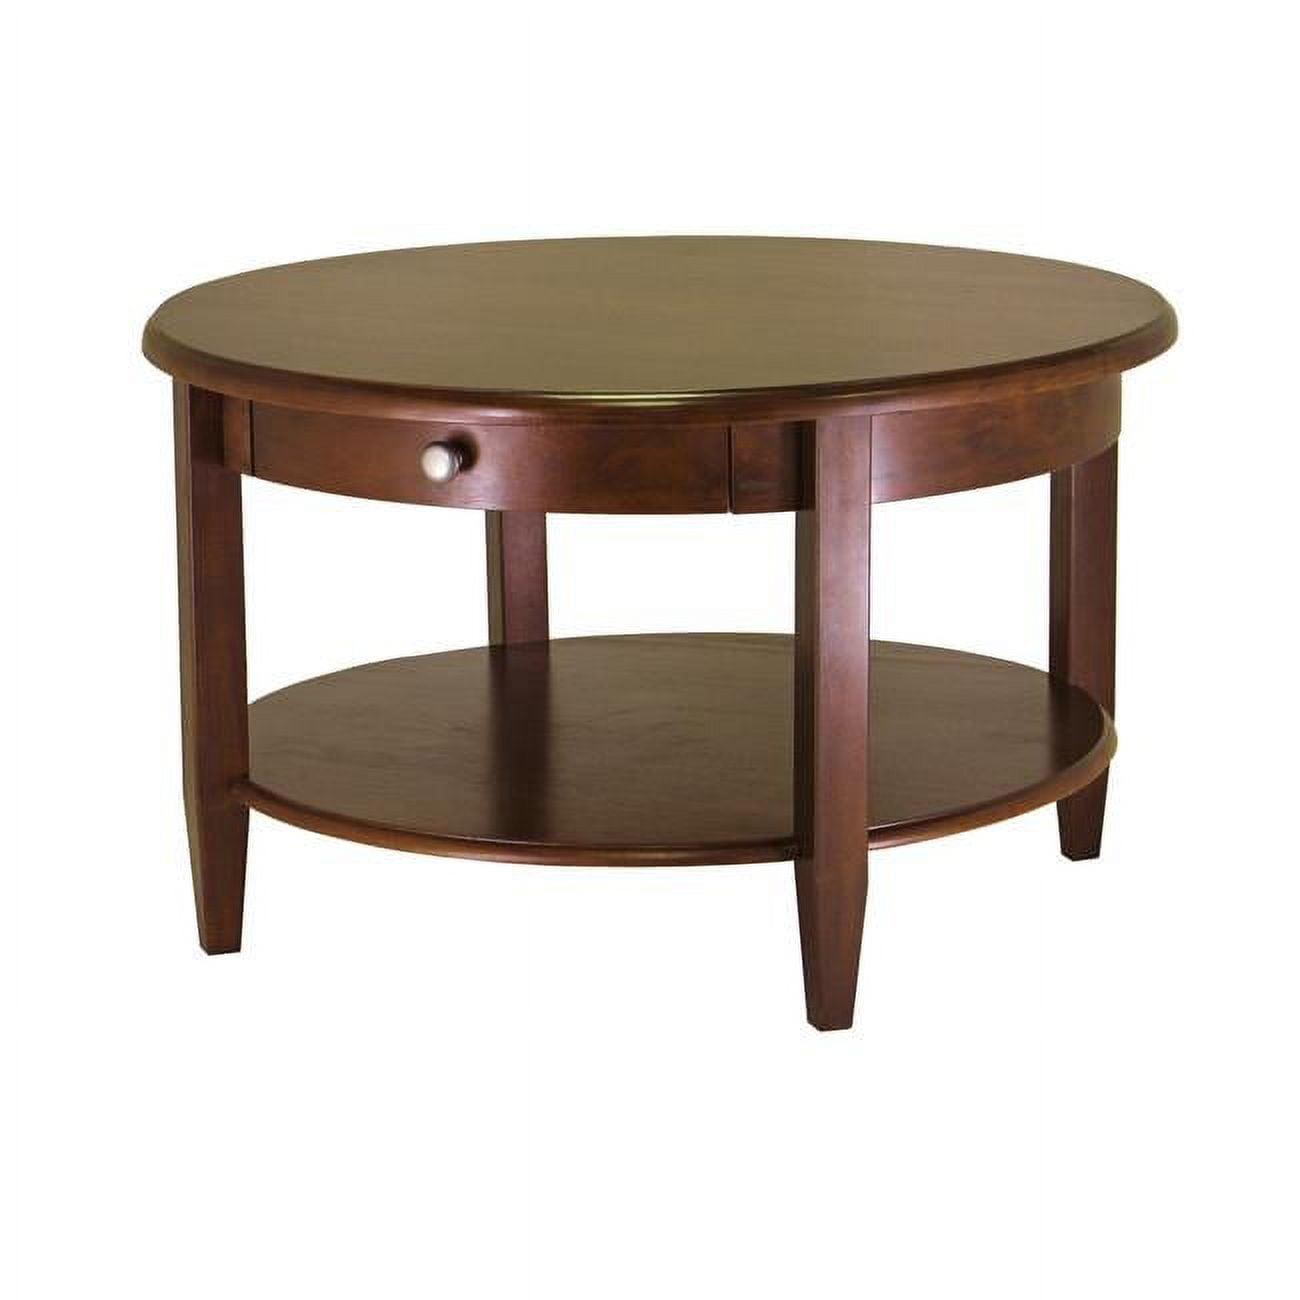 Transitional Antique Walnut Round Outdoor Coffee Table with Storage